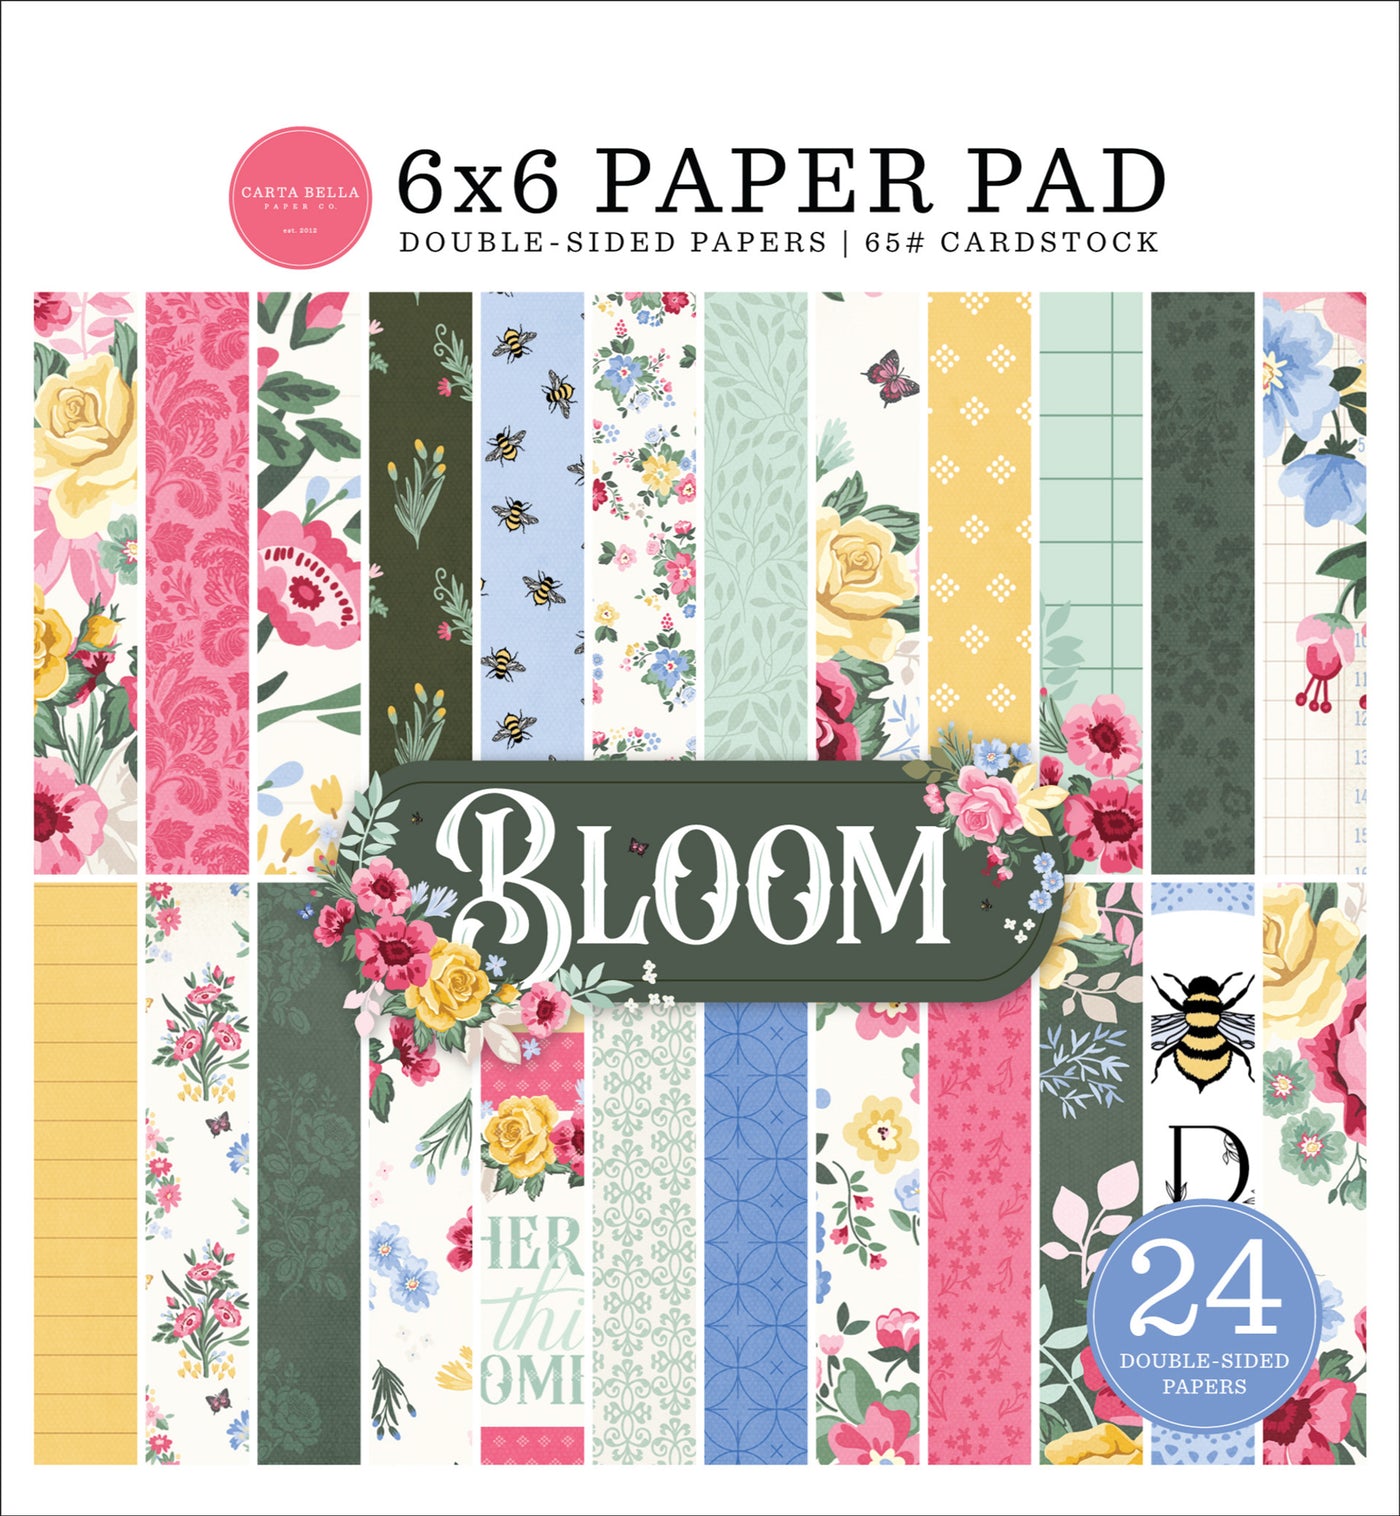 6x6 BLOOM pad with 24 double-sided sheets, great for springtime card making and other happy craft projects. From Carta Bella Paper Co.